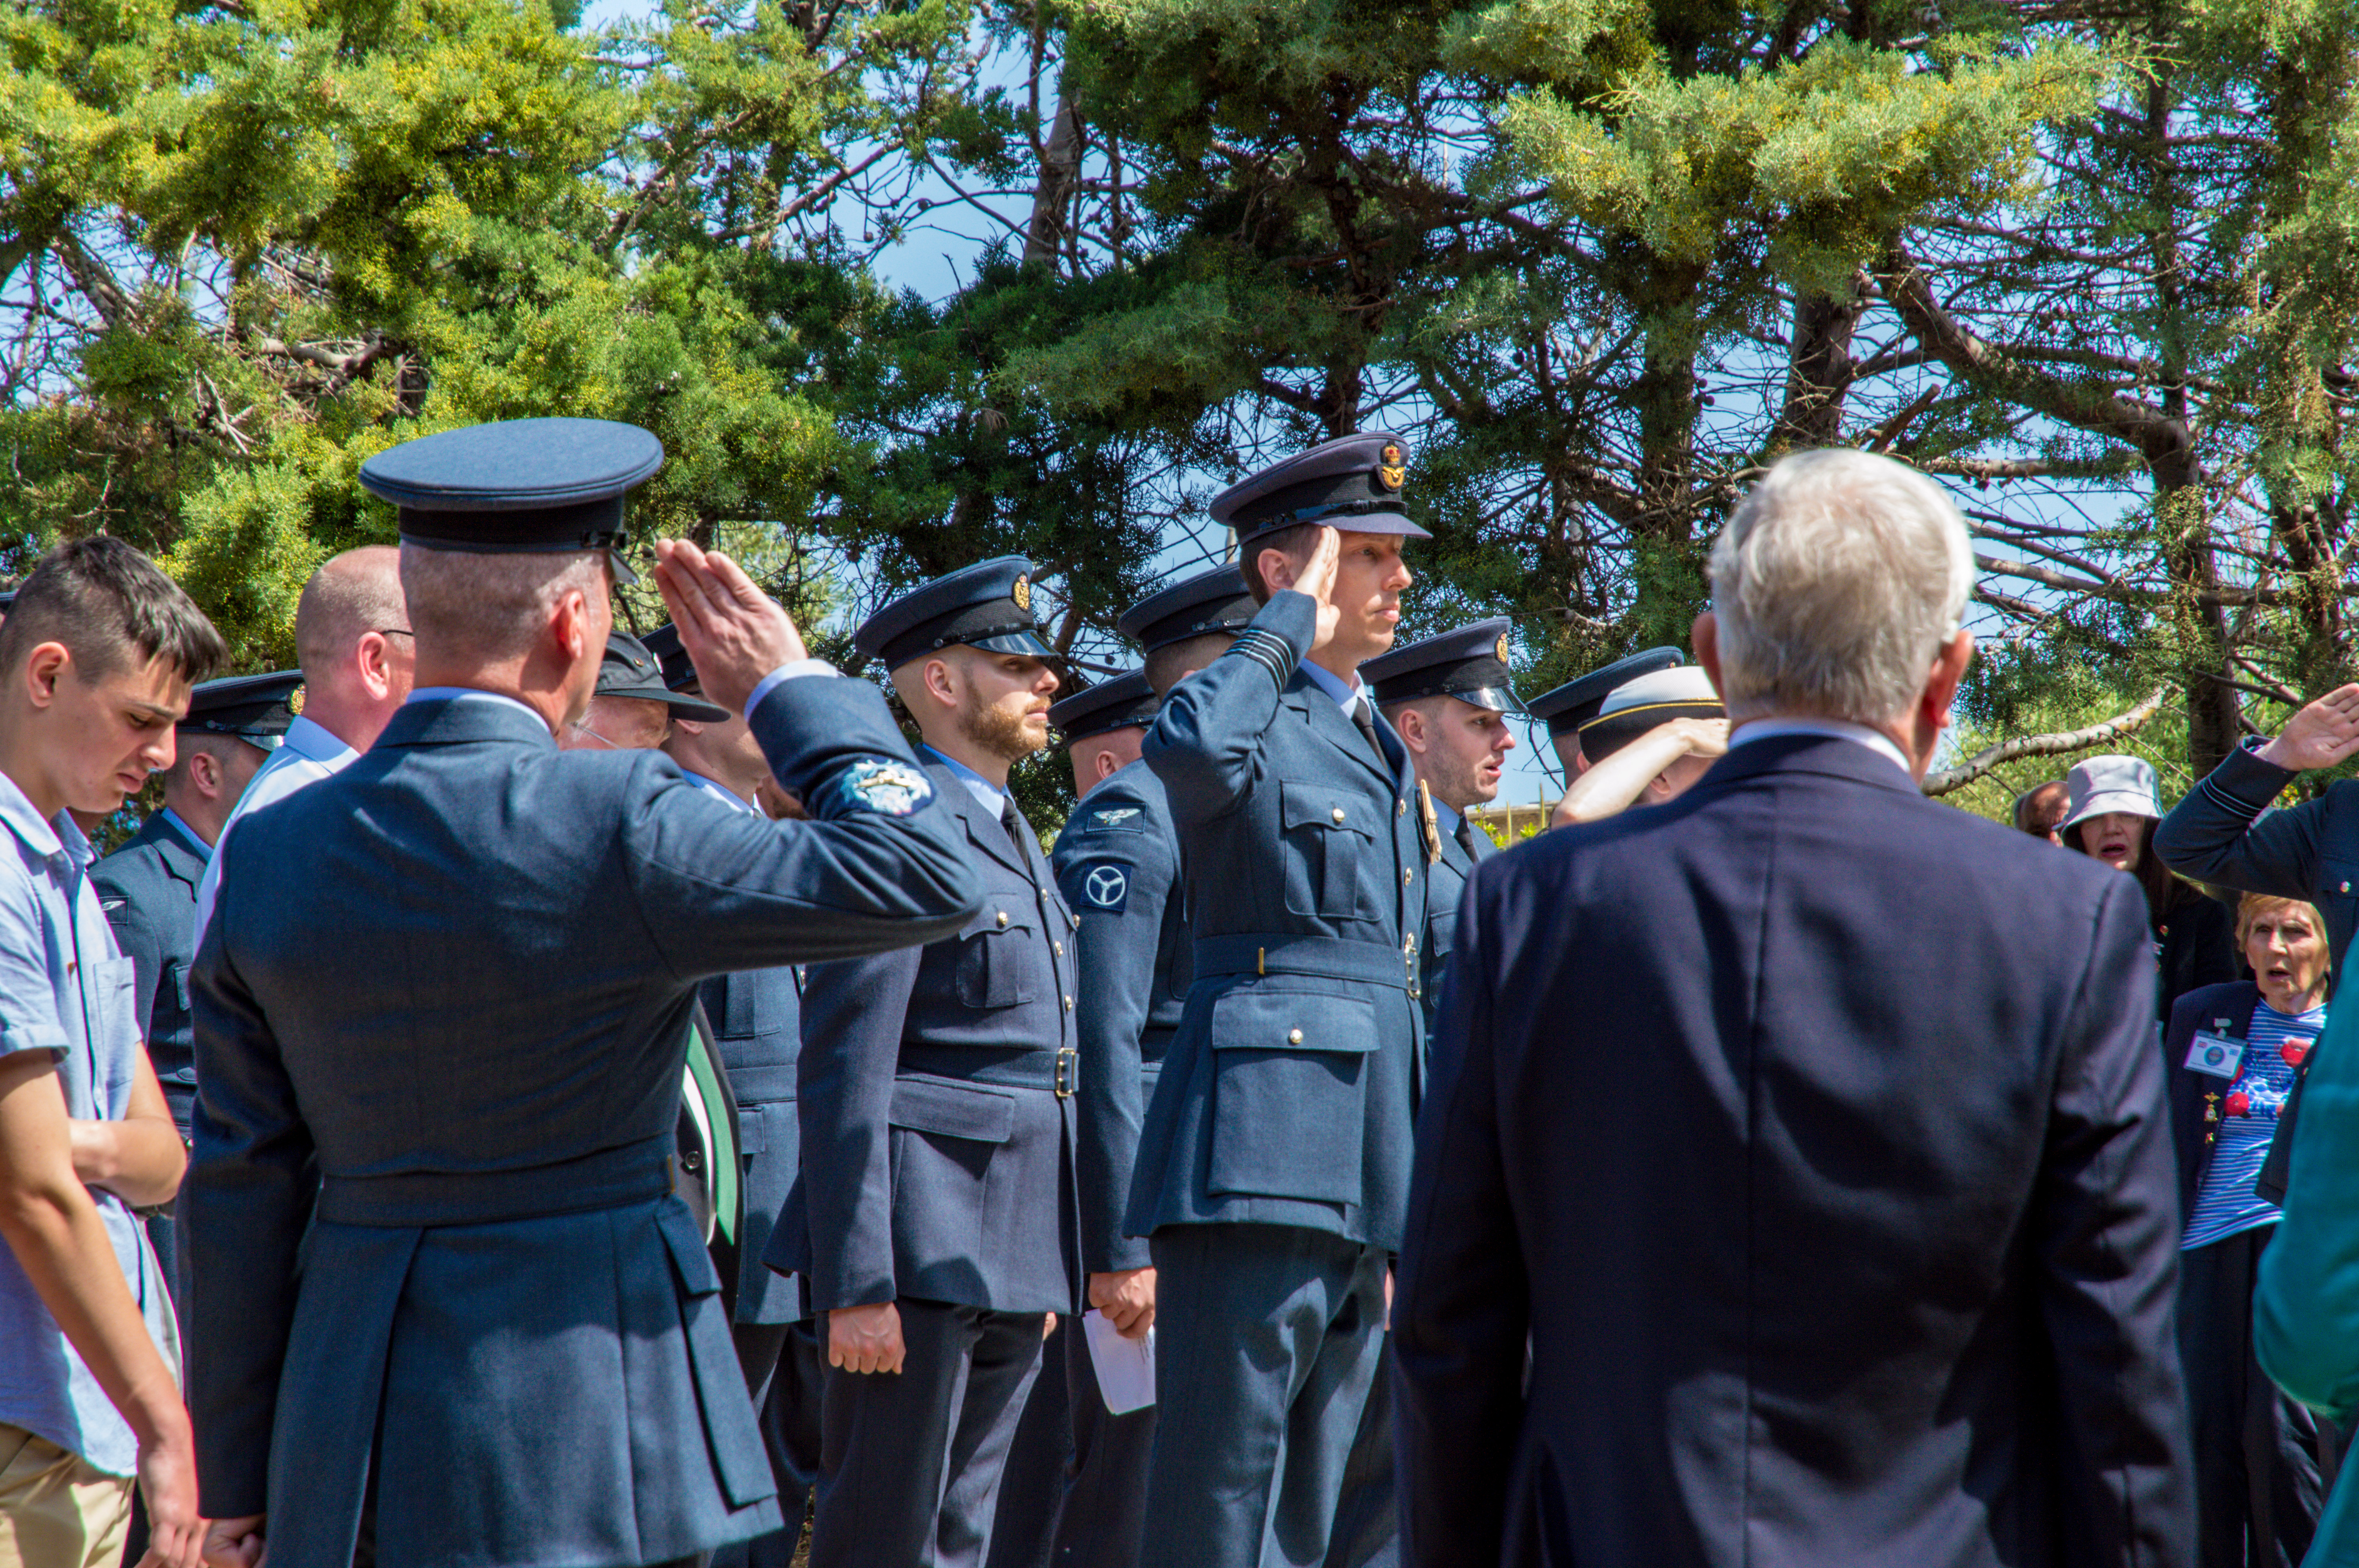 Personnel salute with members of the public.